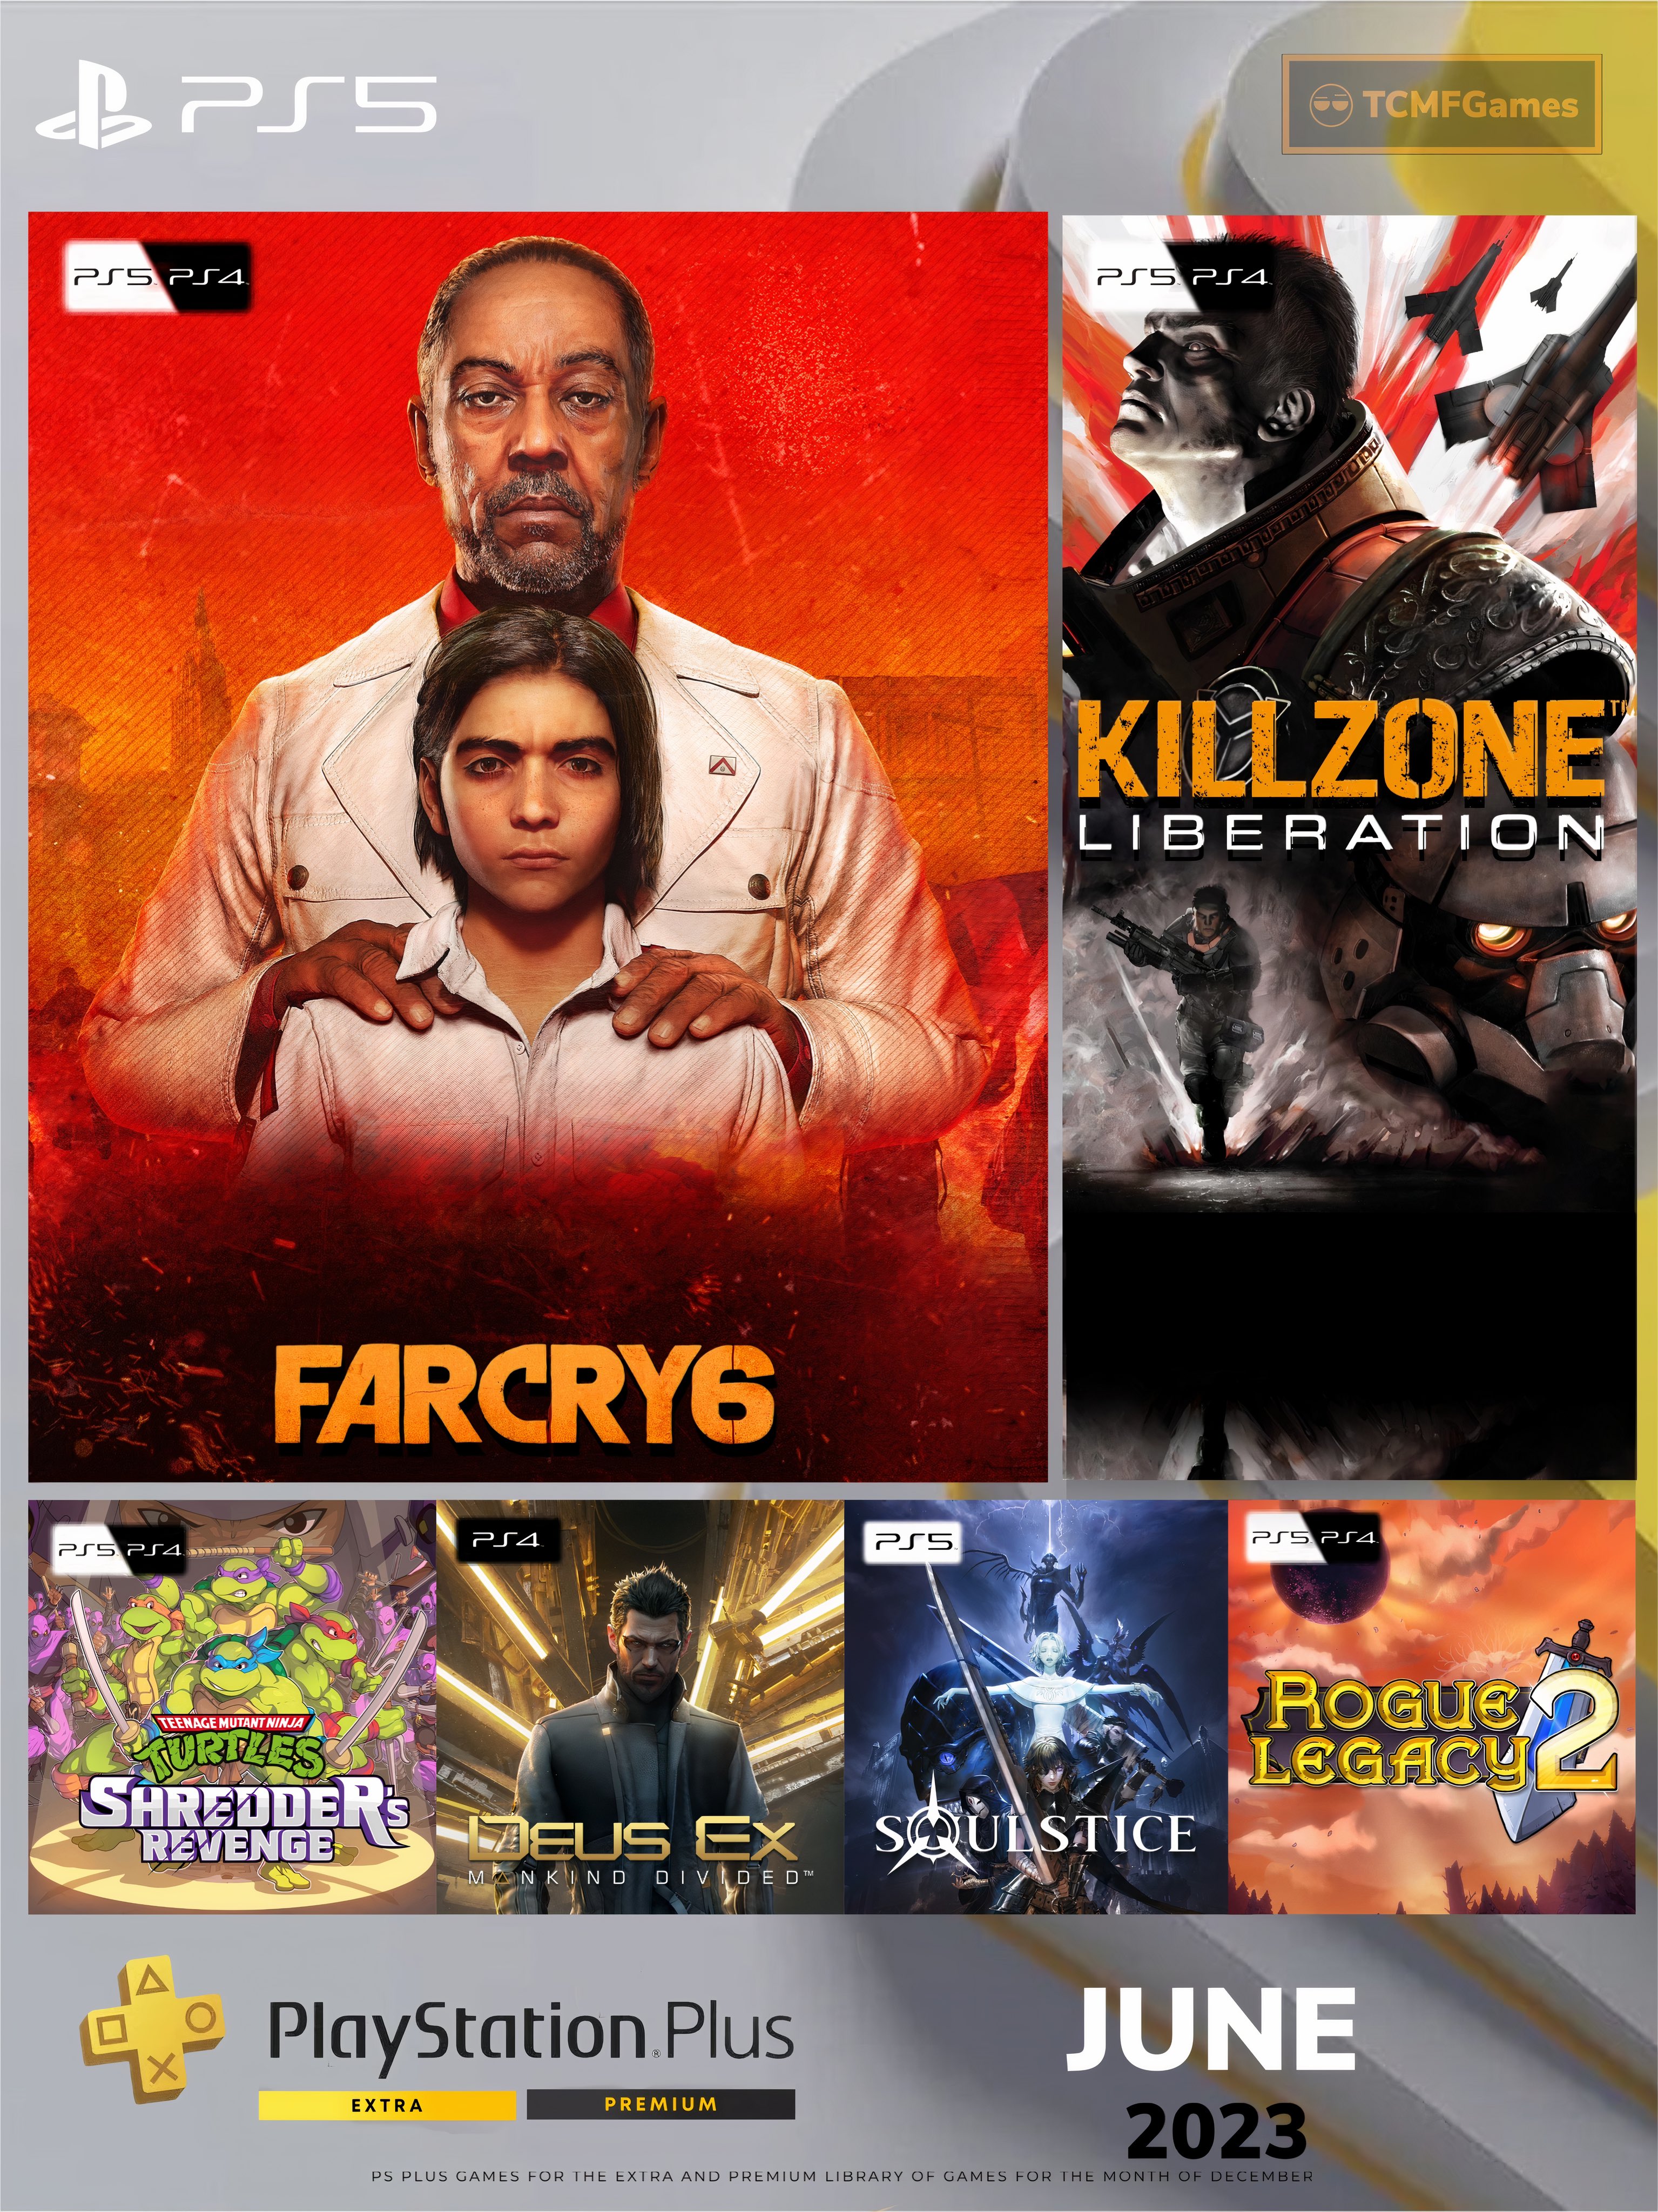 TCMFGames on X: PS Plus Extra and Premium adds 28 Games this